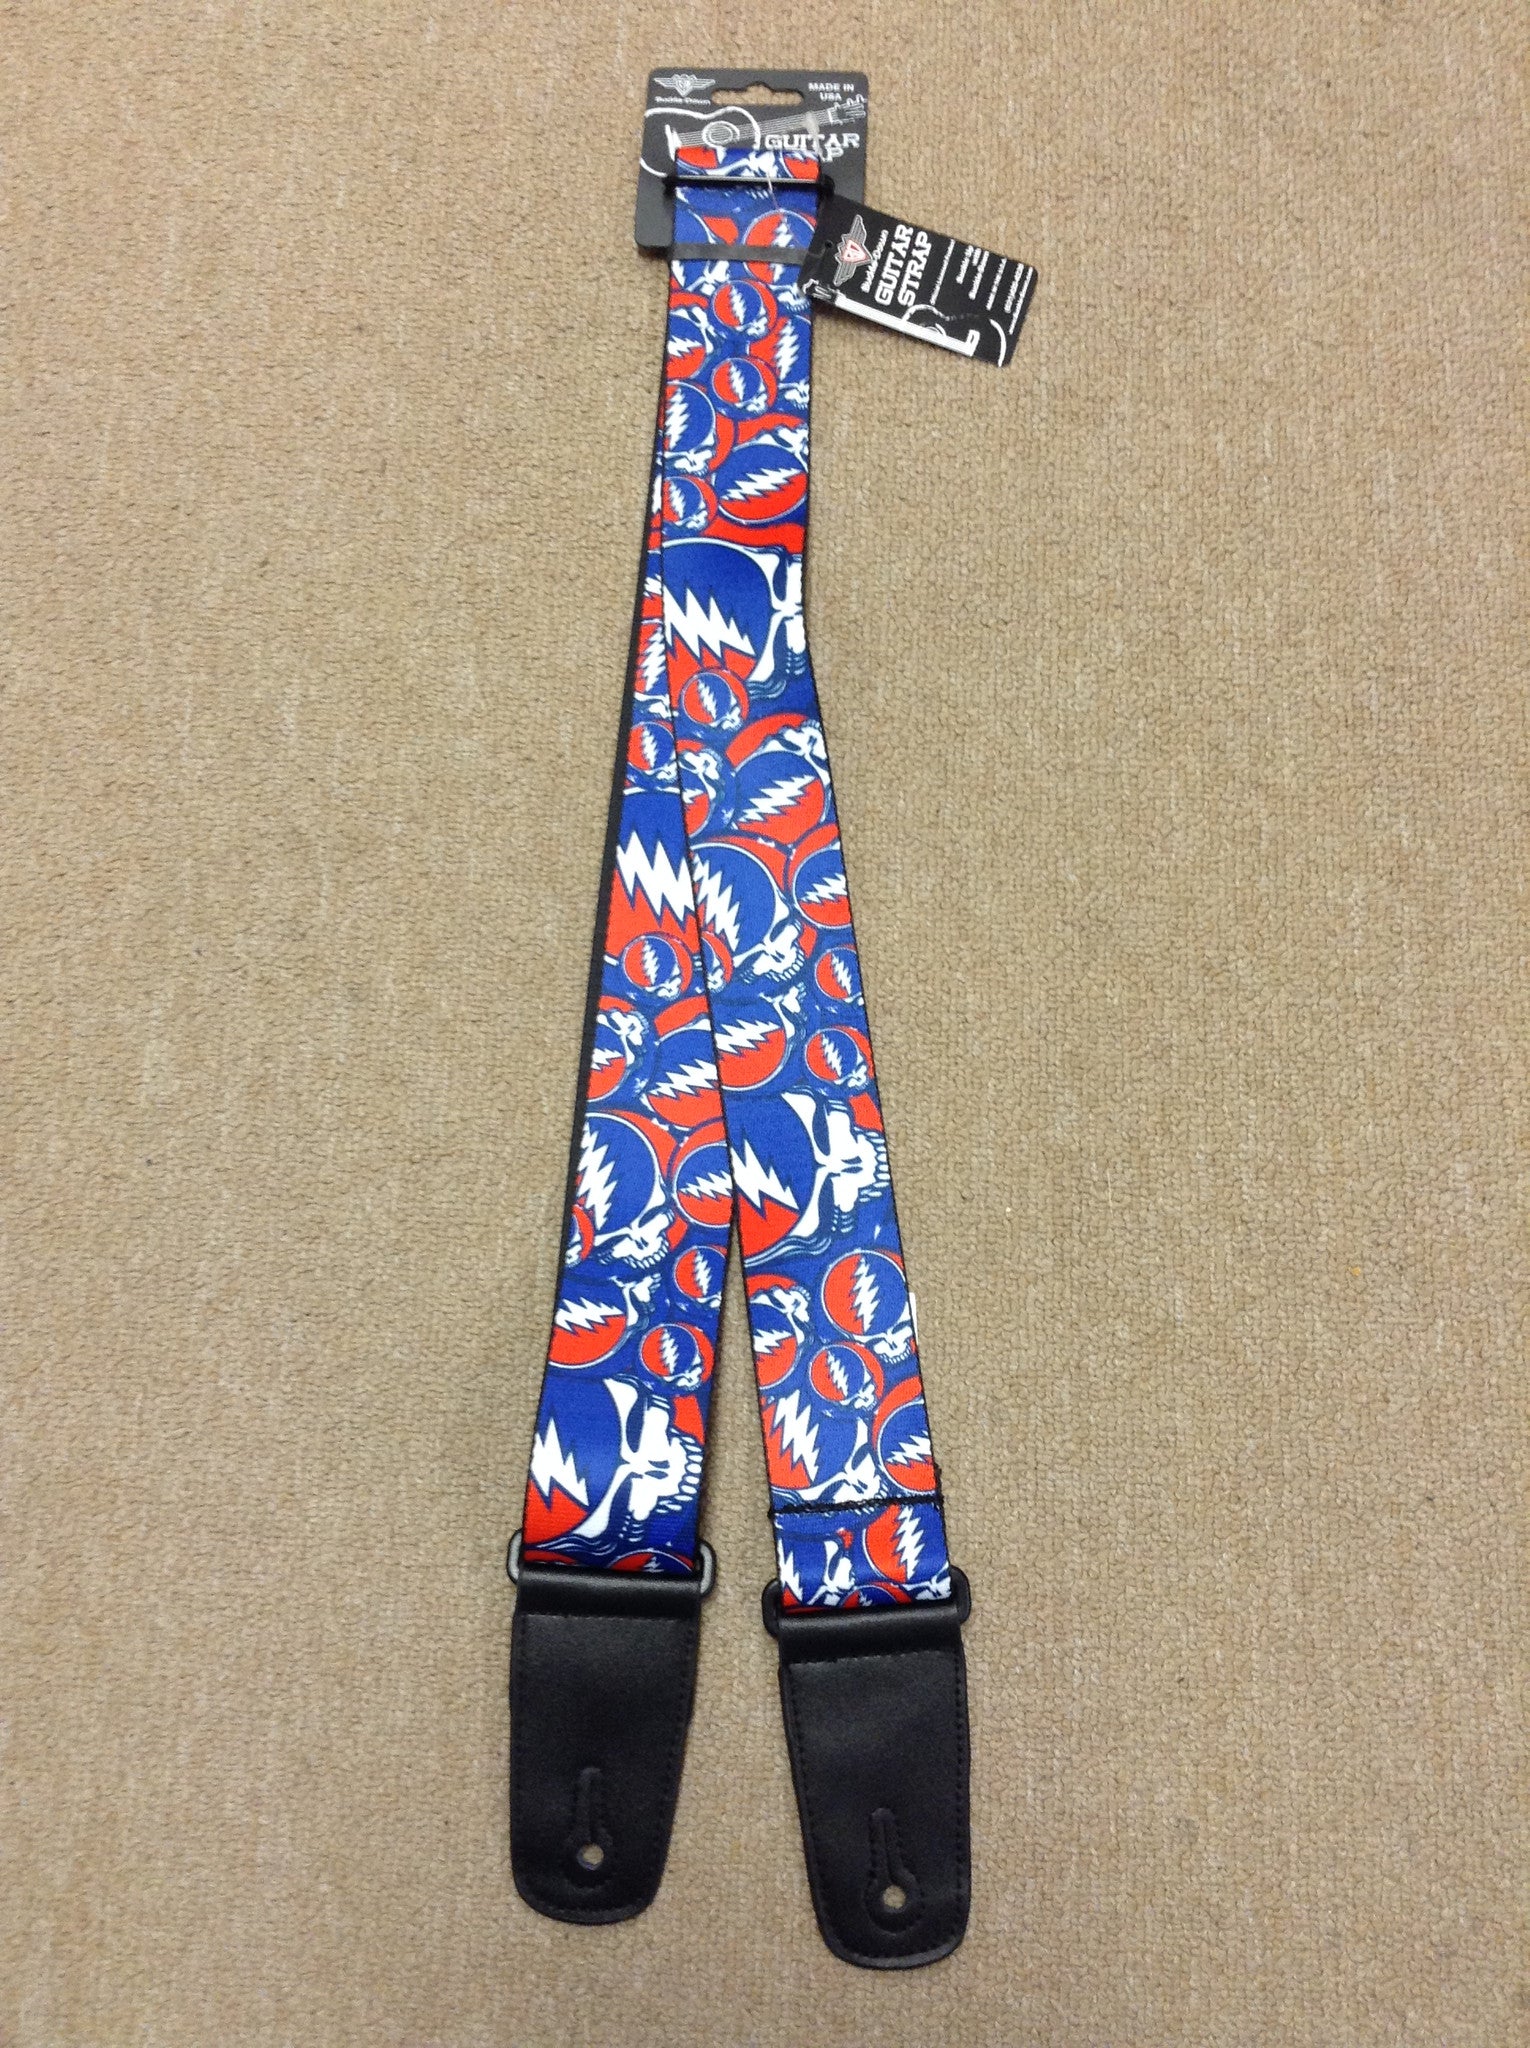 Steal Your Face Collage Guitar Strap - HalfMoonMusic